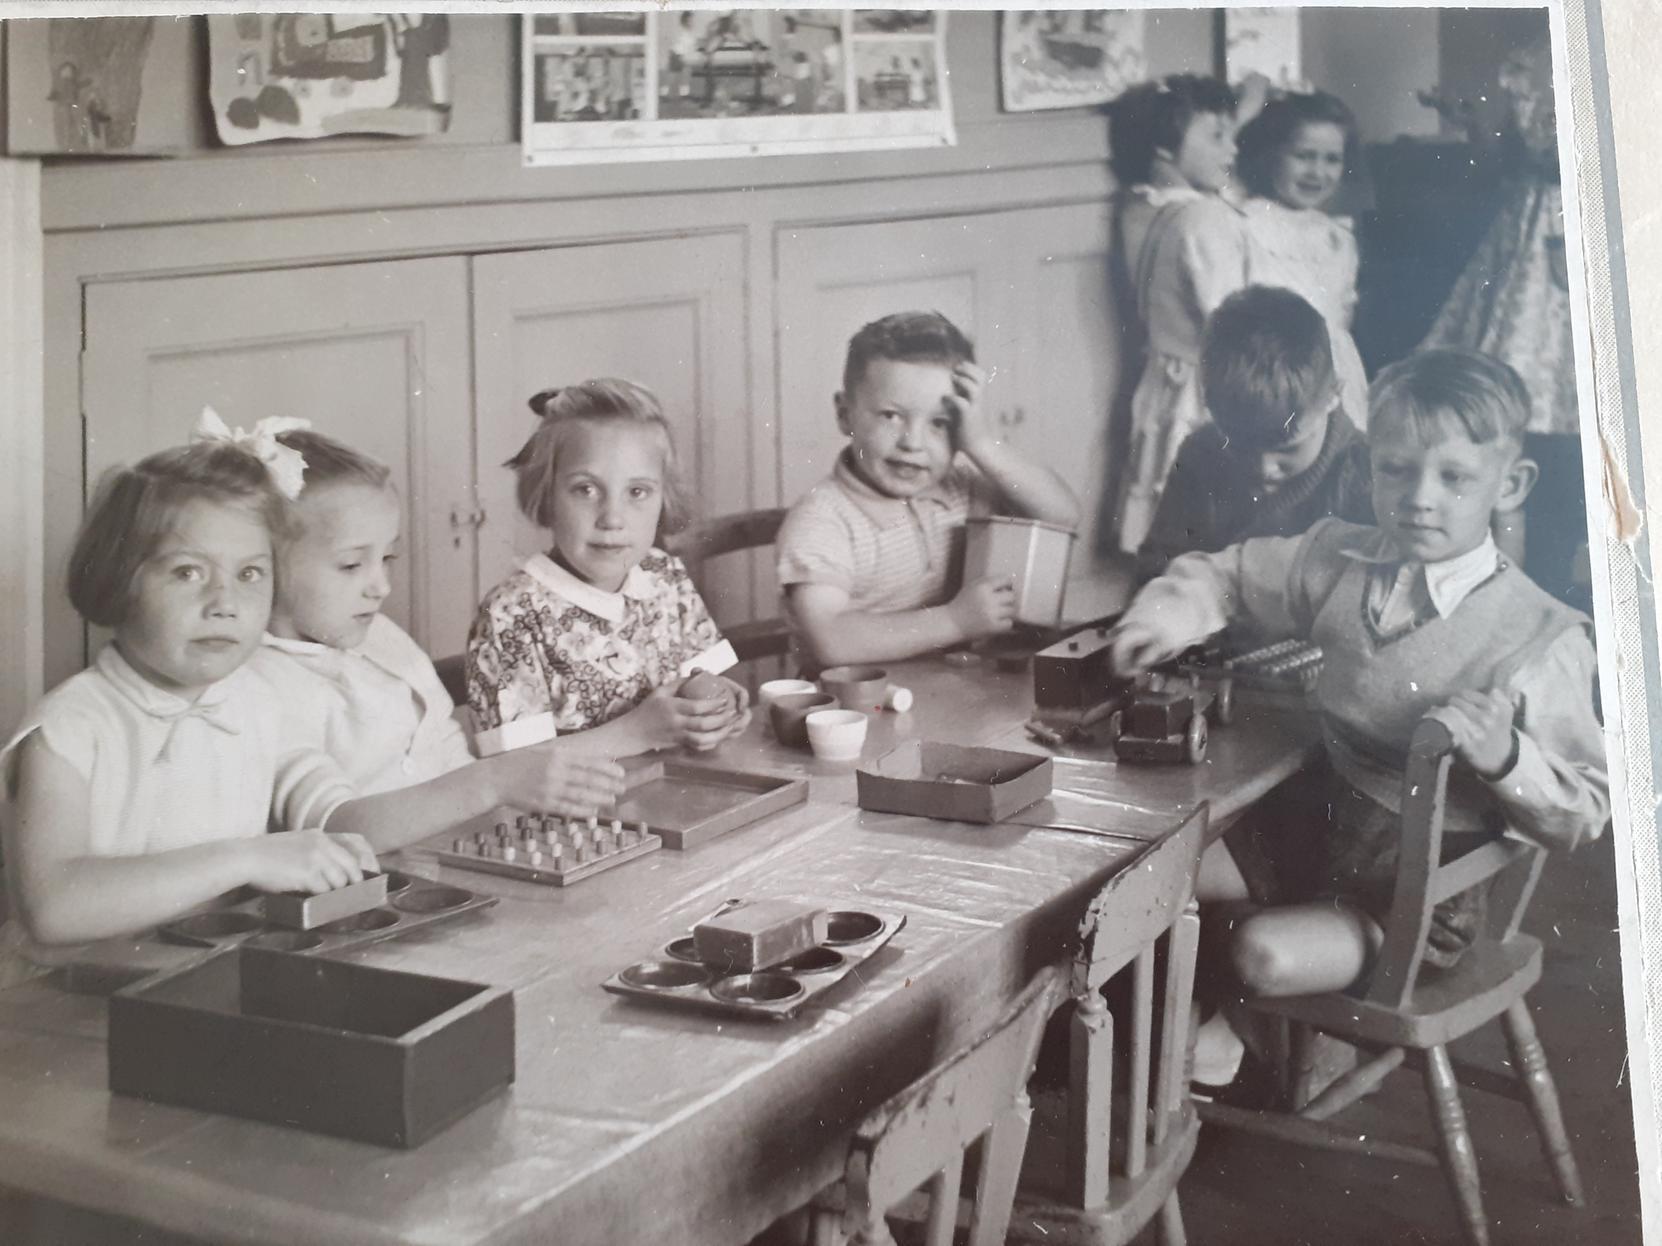 Normanton Common Infants School about 1958. From left: Janet Hirst, Joy Richards, Jennifer Archer, William Patchett, Dennis Fradgley, Sidney Jones, Jacqueline Kelly, Gloria Holmes, Christine Bednall. Photo submitted by reader Janet Yarrow.